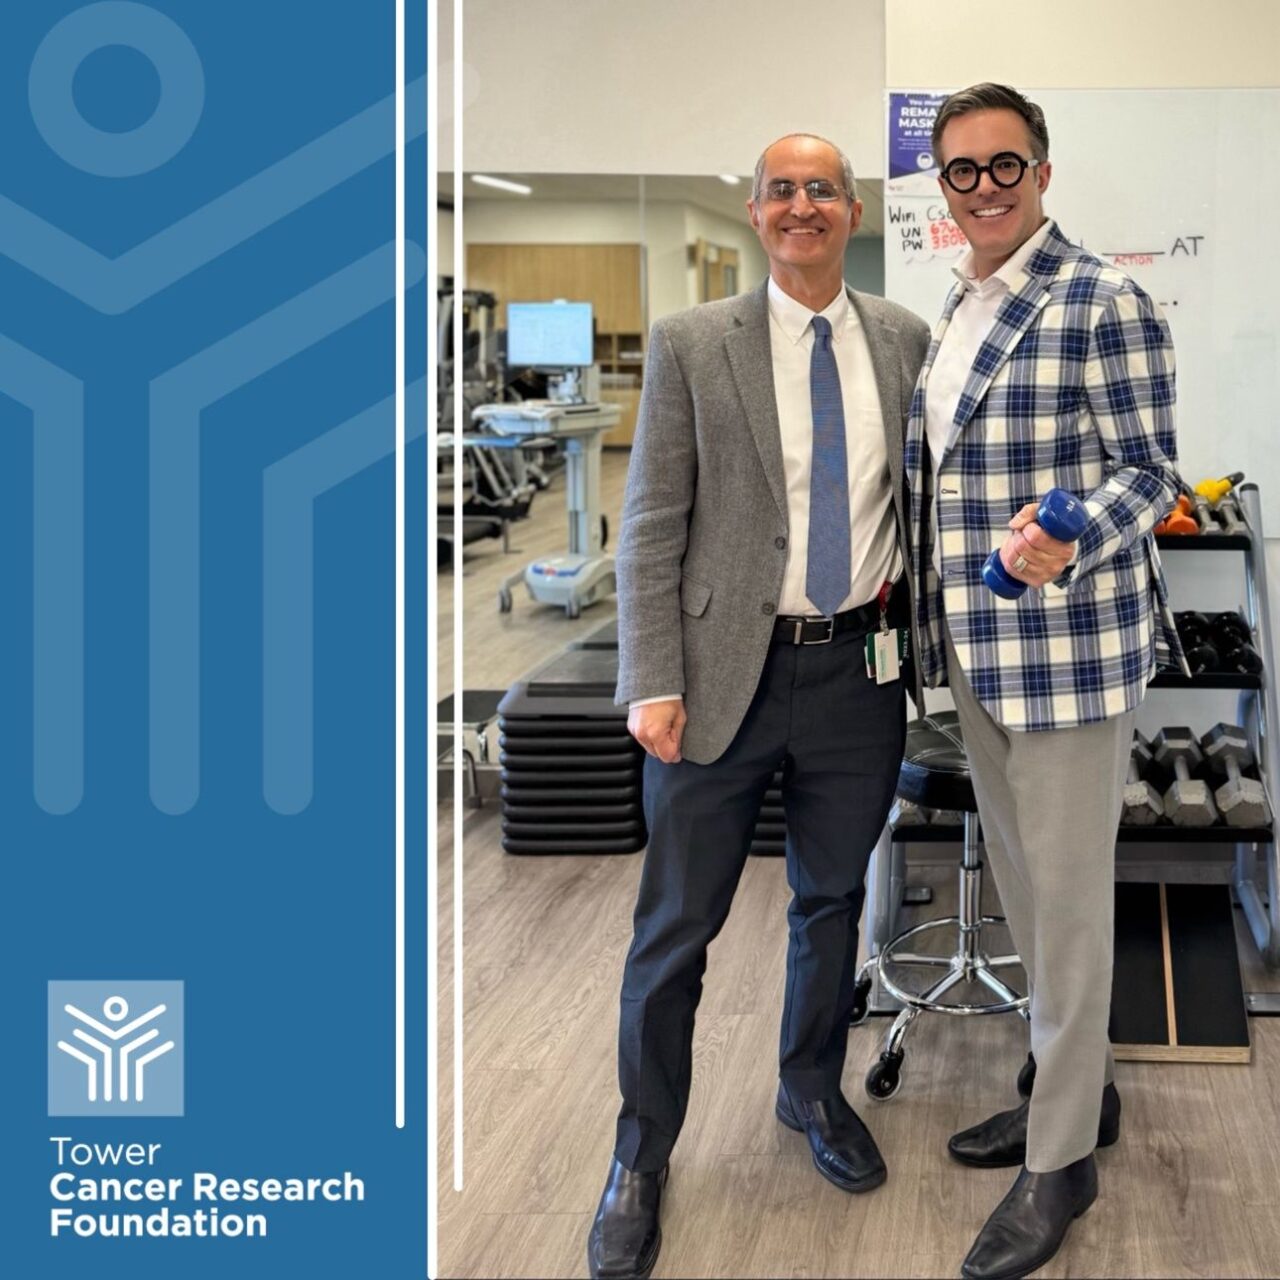 Christopher Clinton Conway: Cedar-Sinai’s Dr. Arash Asher leads an emerging movement in cancer care